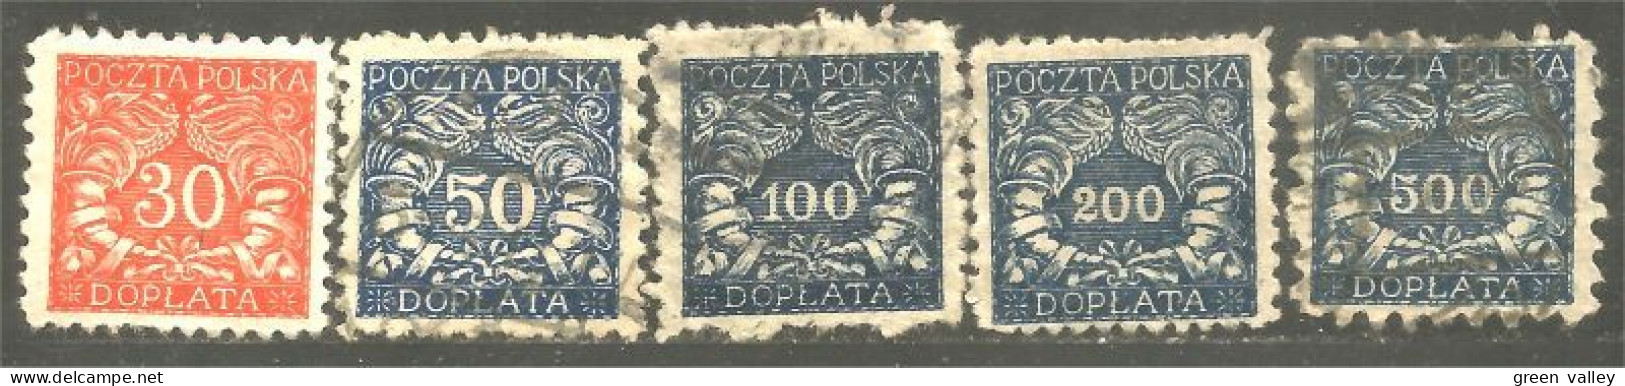 740 Pologne Taxe Postage Due 1919-1920 (POL-328) - Strafport